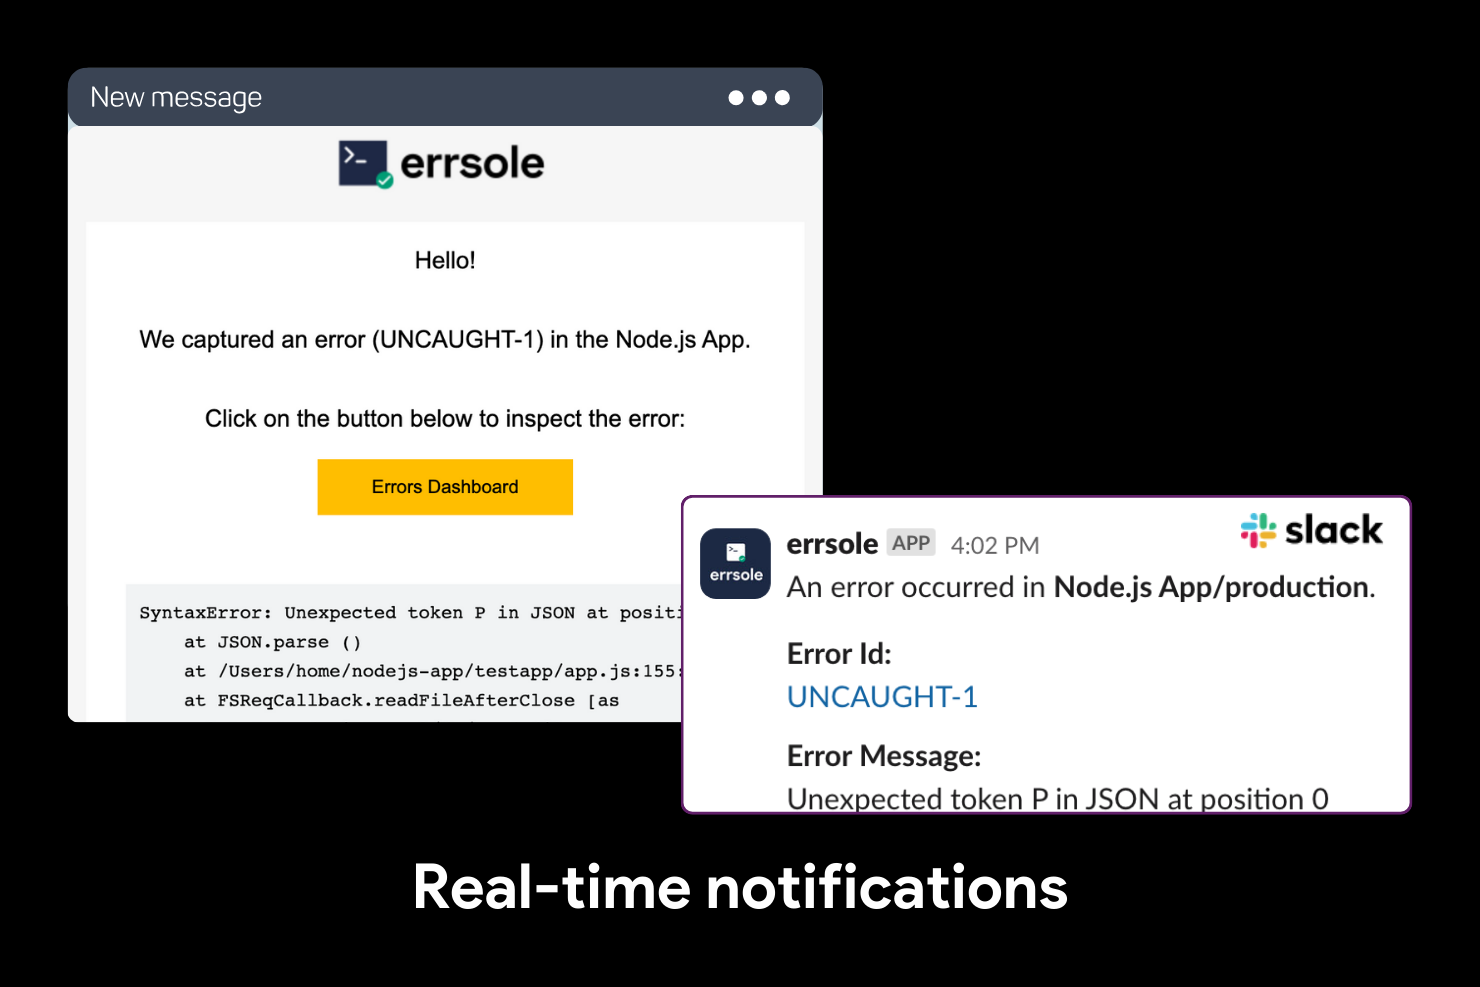 errsole Real-time notifications